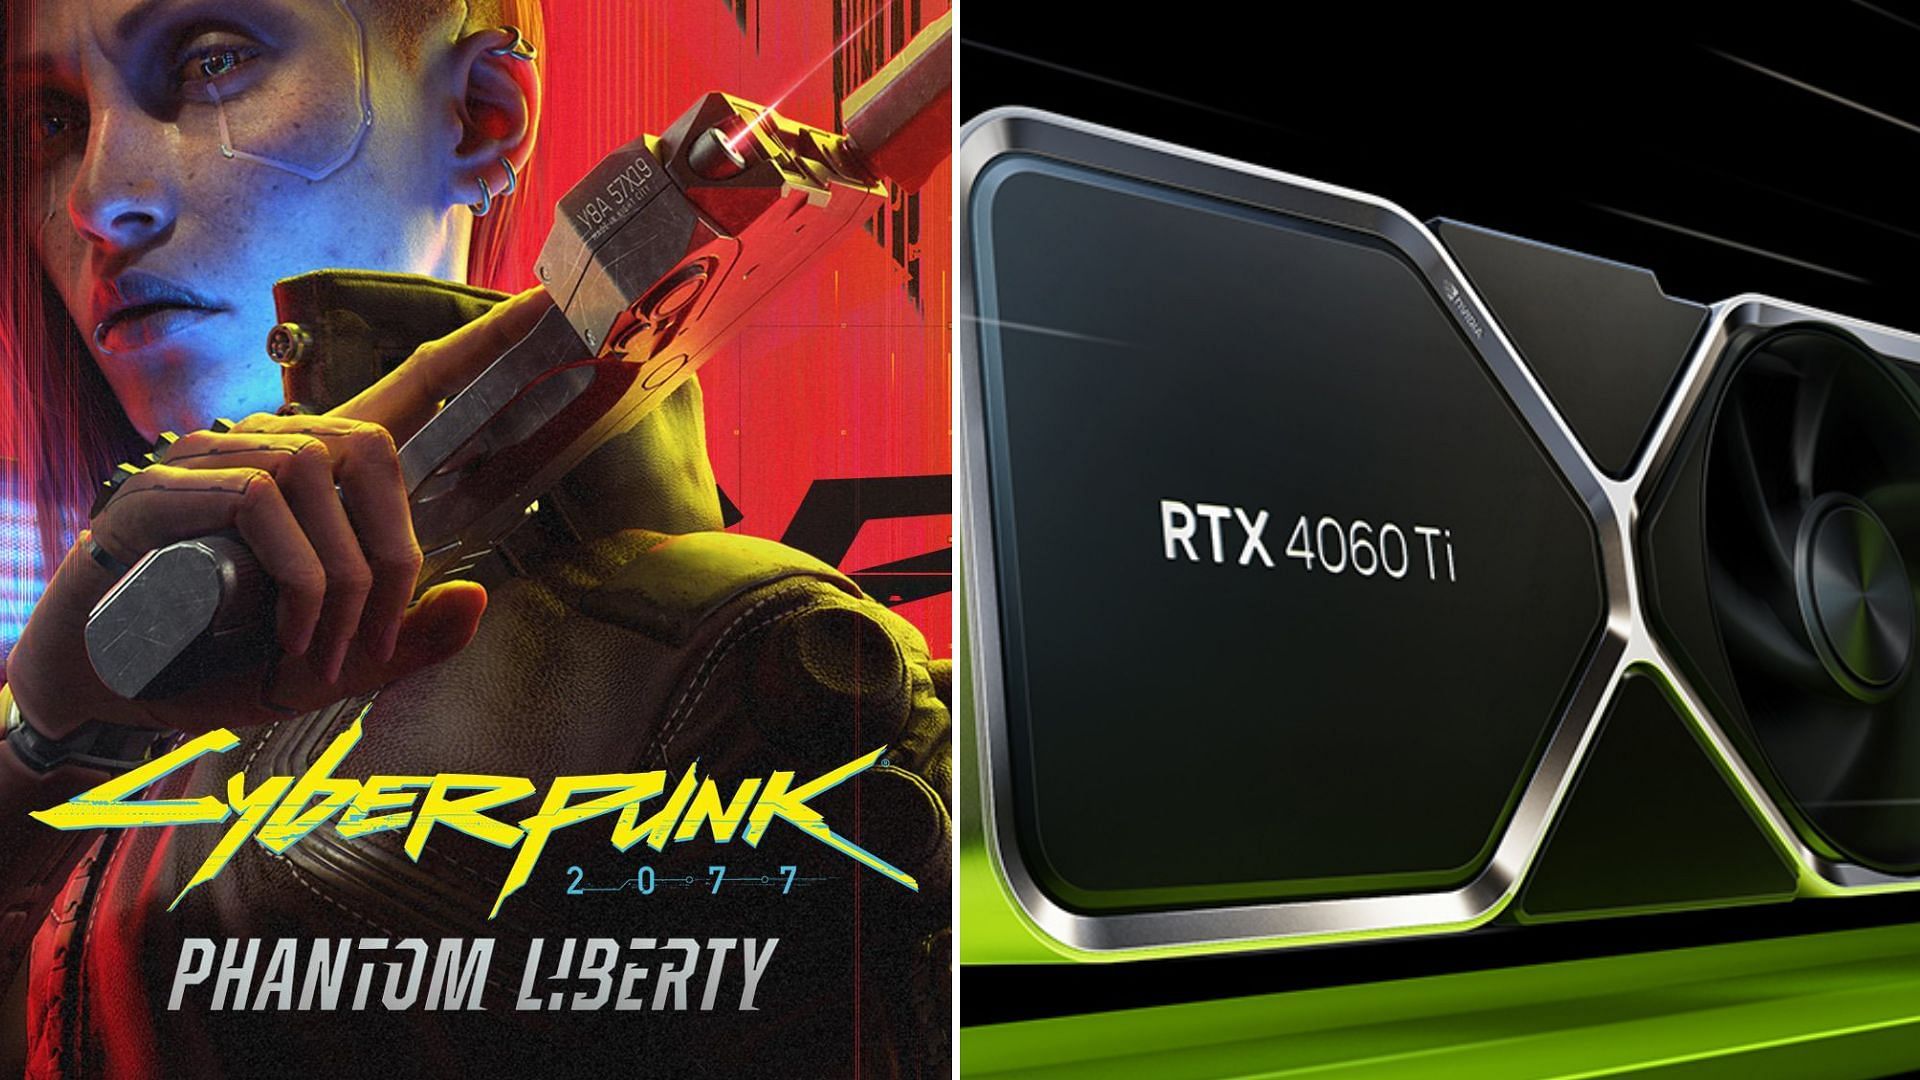 The Nvidia RTX 4060 and 4060 Ti can play Cyberpunk 2077 with some tweaks (Image via Nvidia and CD Projekt Red)